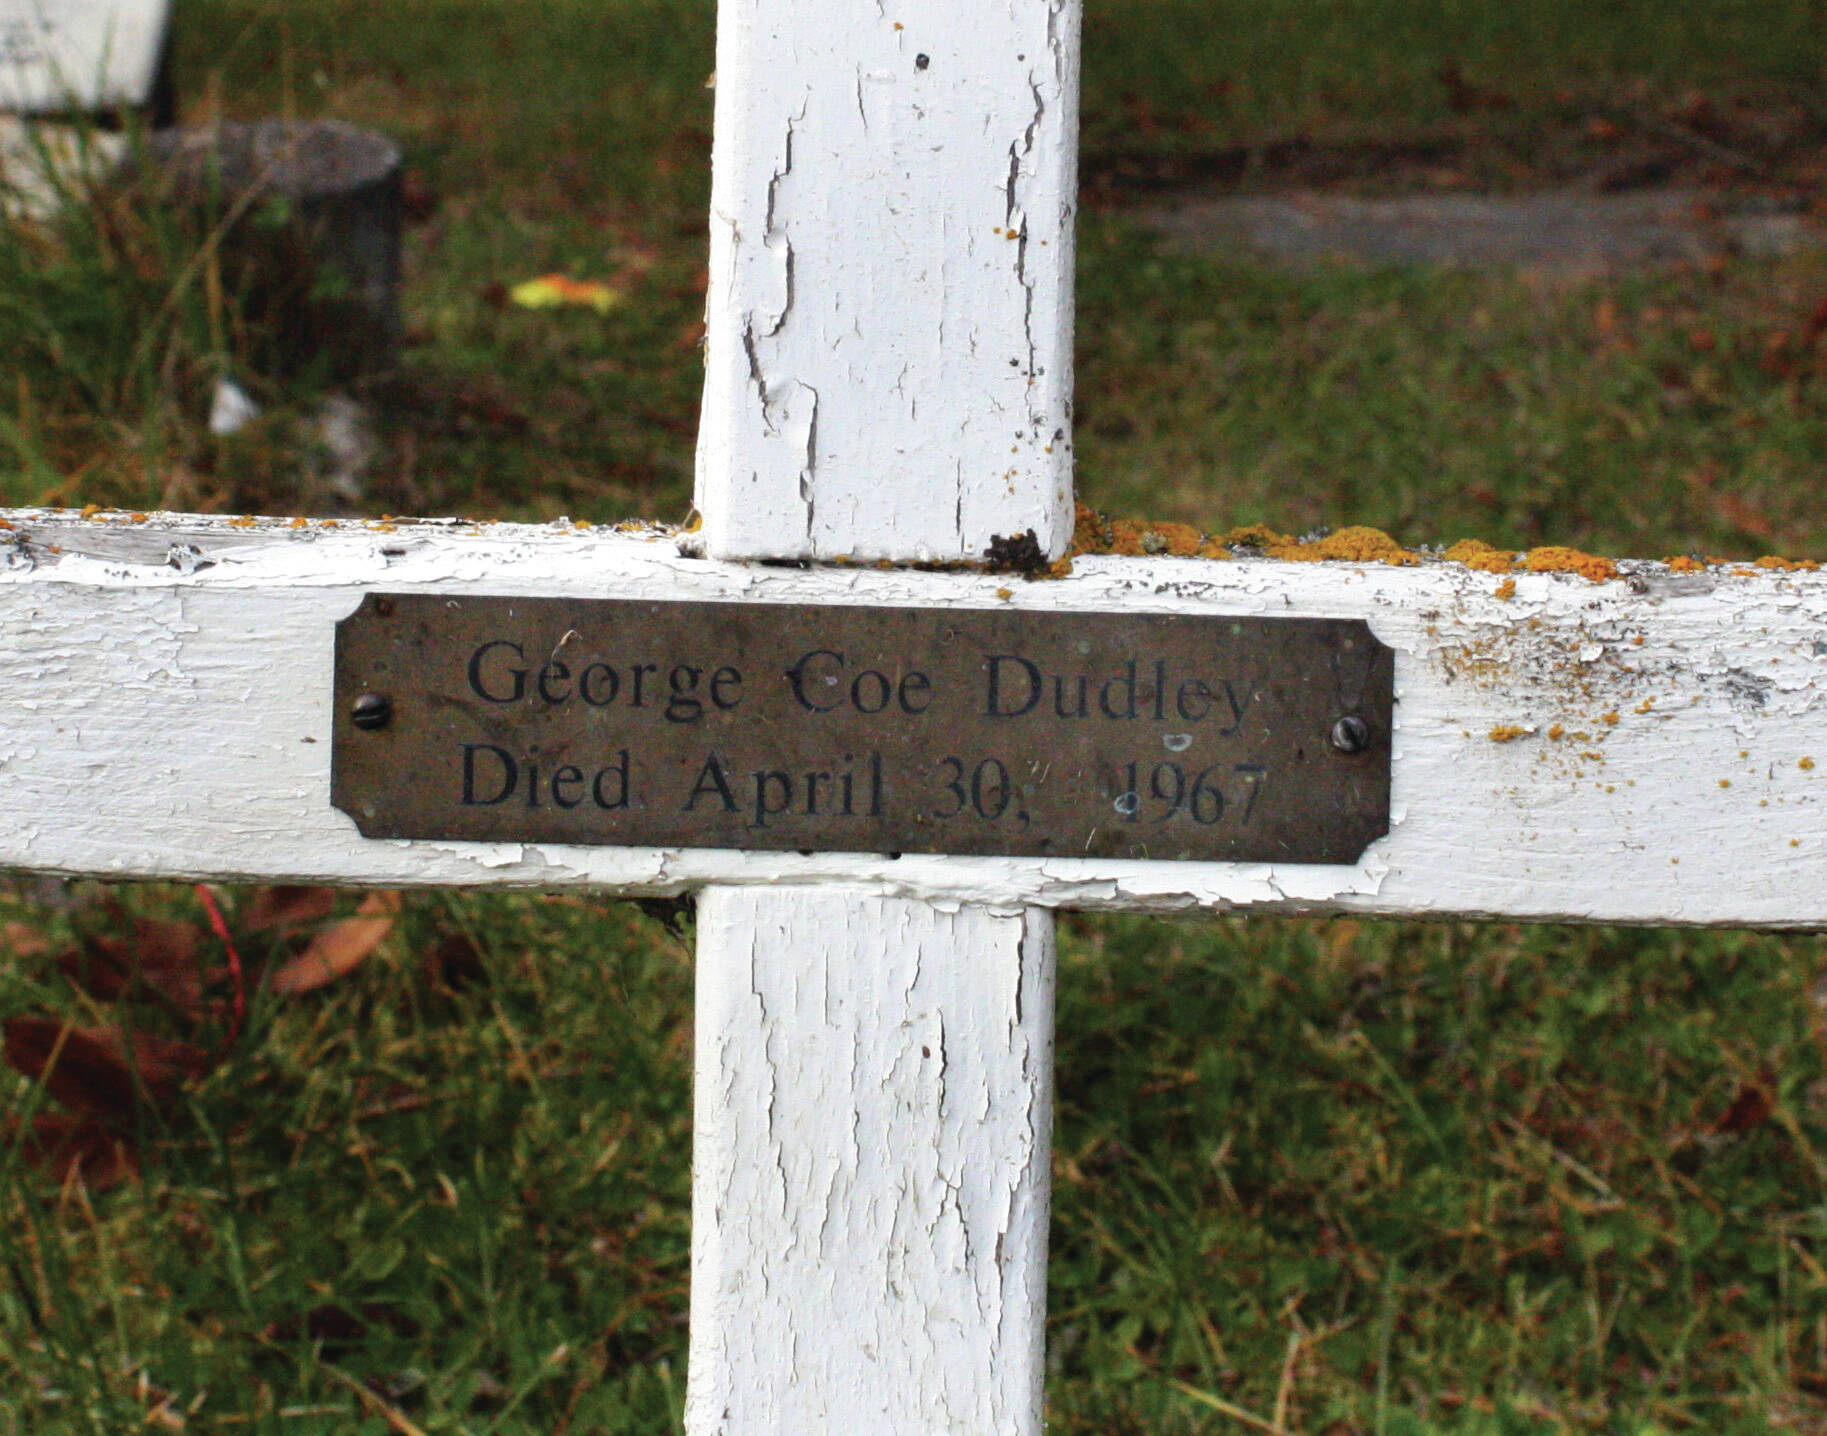 Clark Fair photo
This white, wooden cross and small brass plate in the Kenai City Cemetery mark the last resting place of George Coe Dudley. Getting him into the grave turned out to be no simple task.